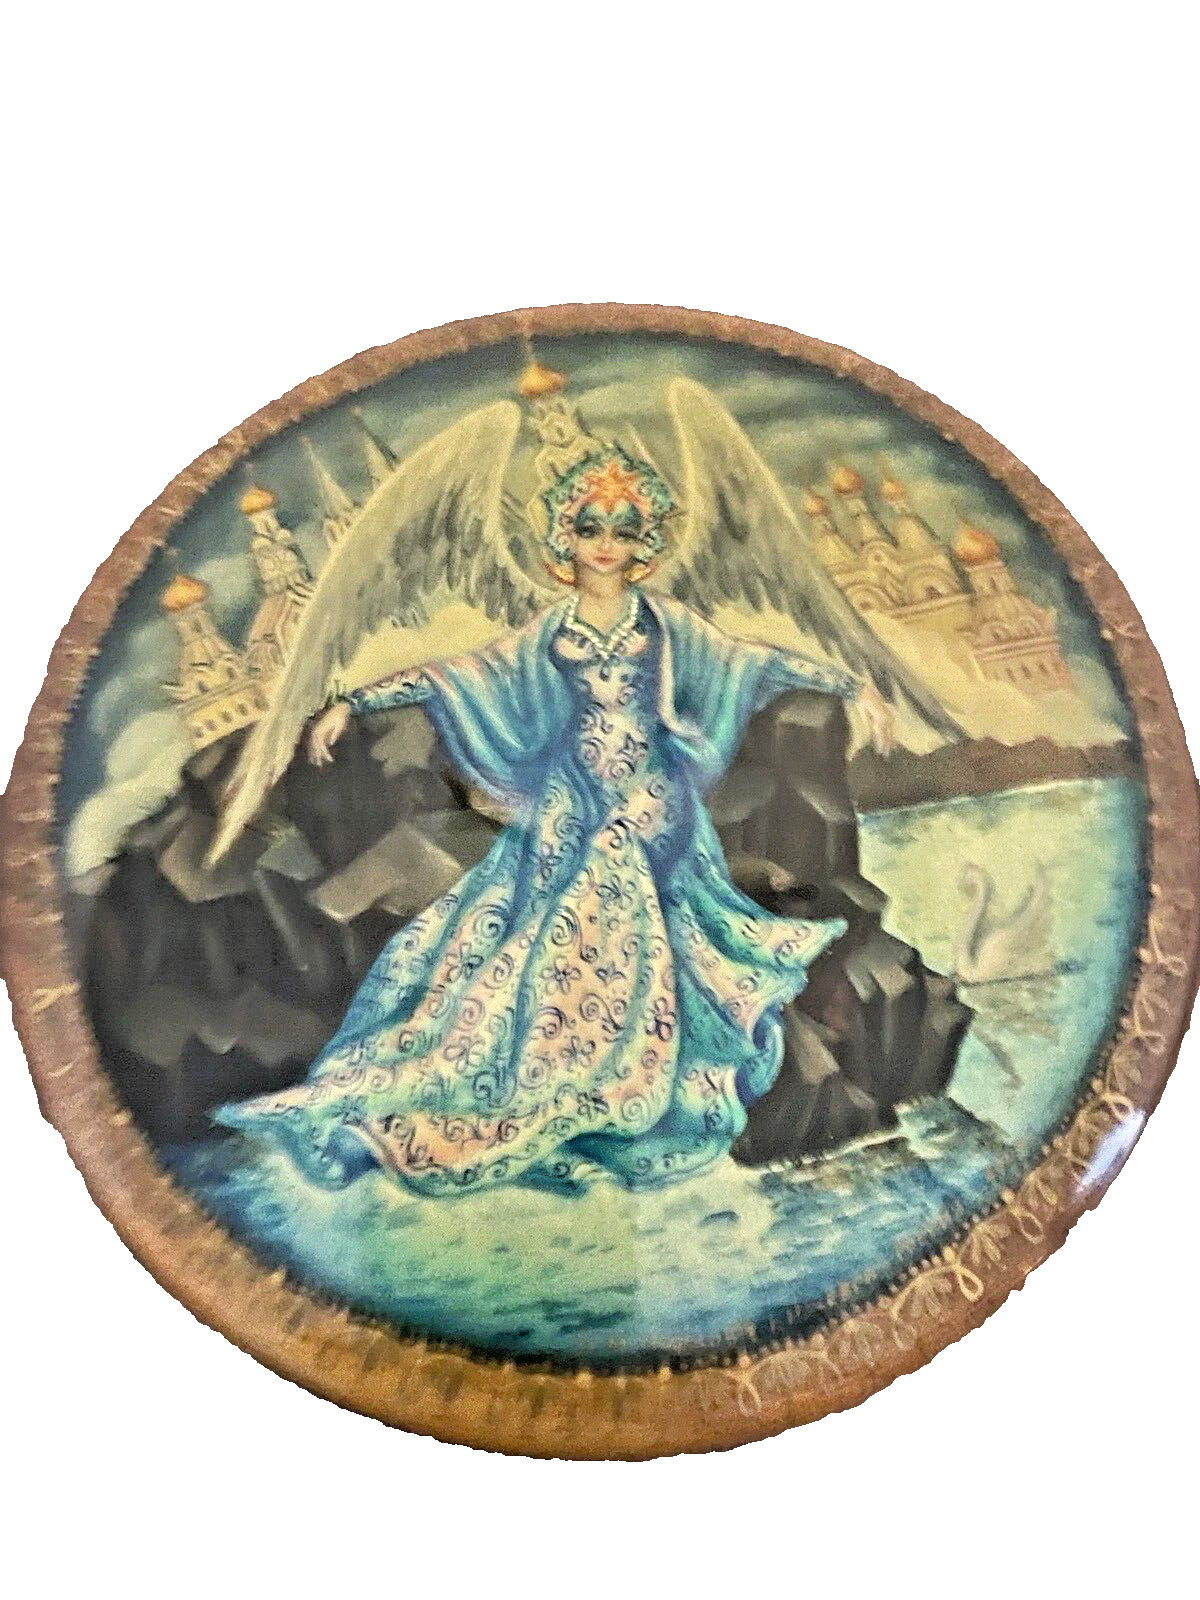 Trinket Box Russian Lacquer Round Box Swan Princess with Wings Signed Wood